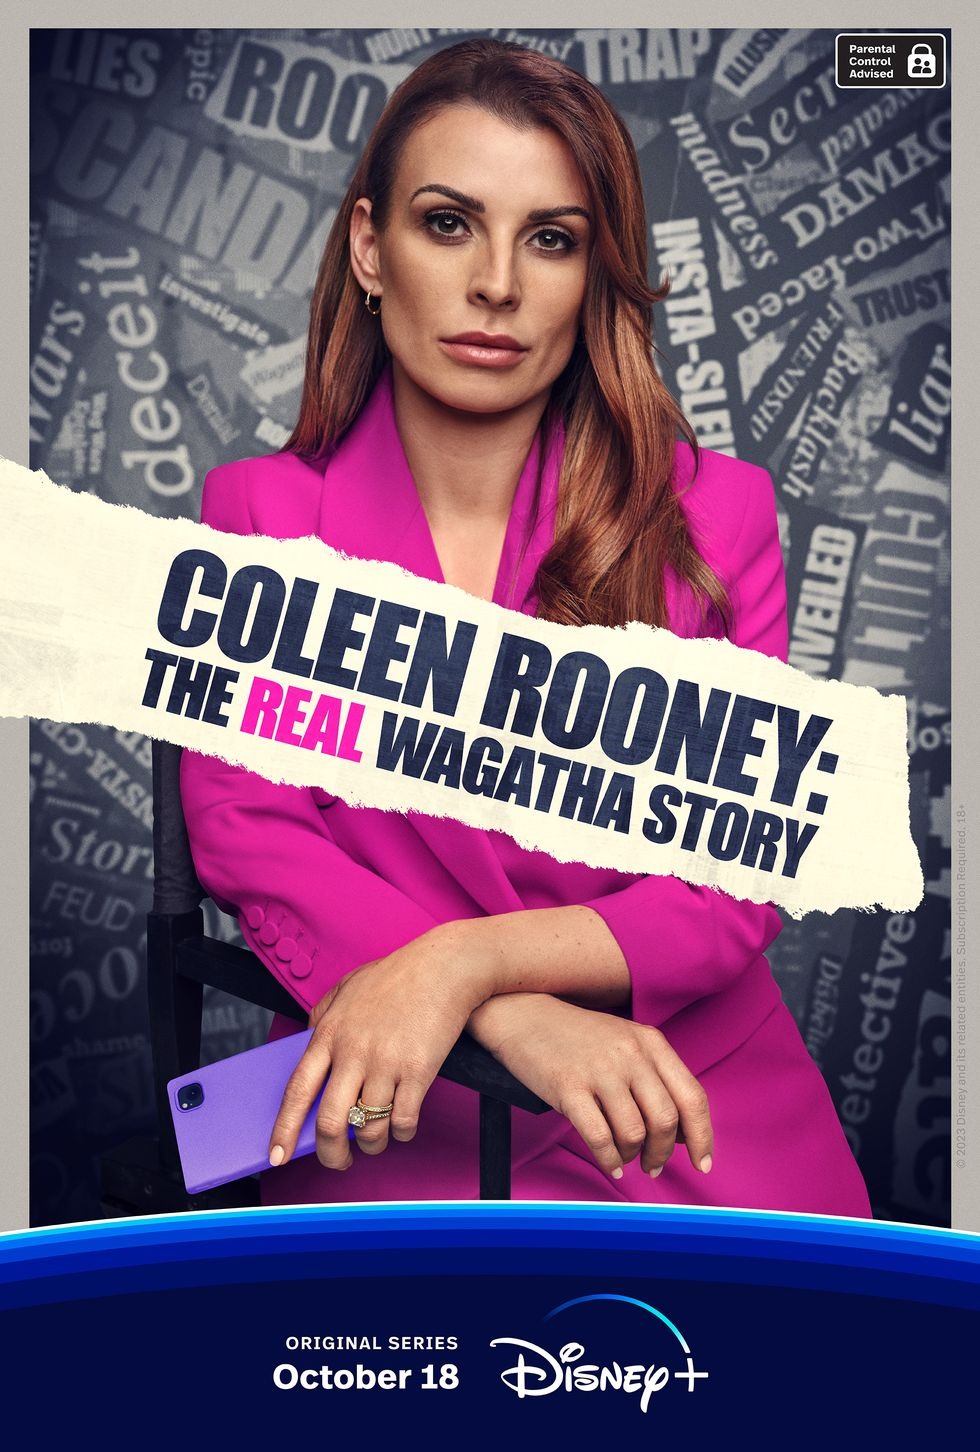 Extra Large TV Poster Image for Coleen Rooney: The Real Wagatha Story 